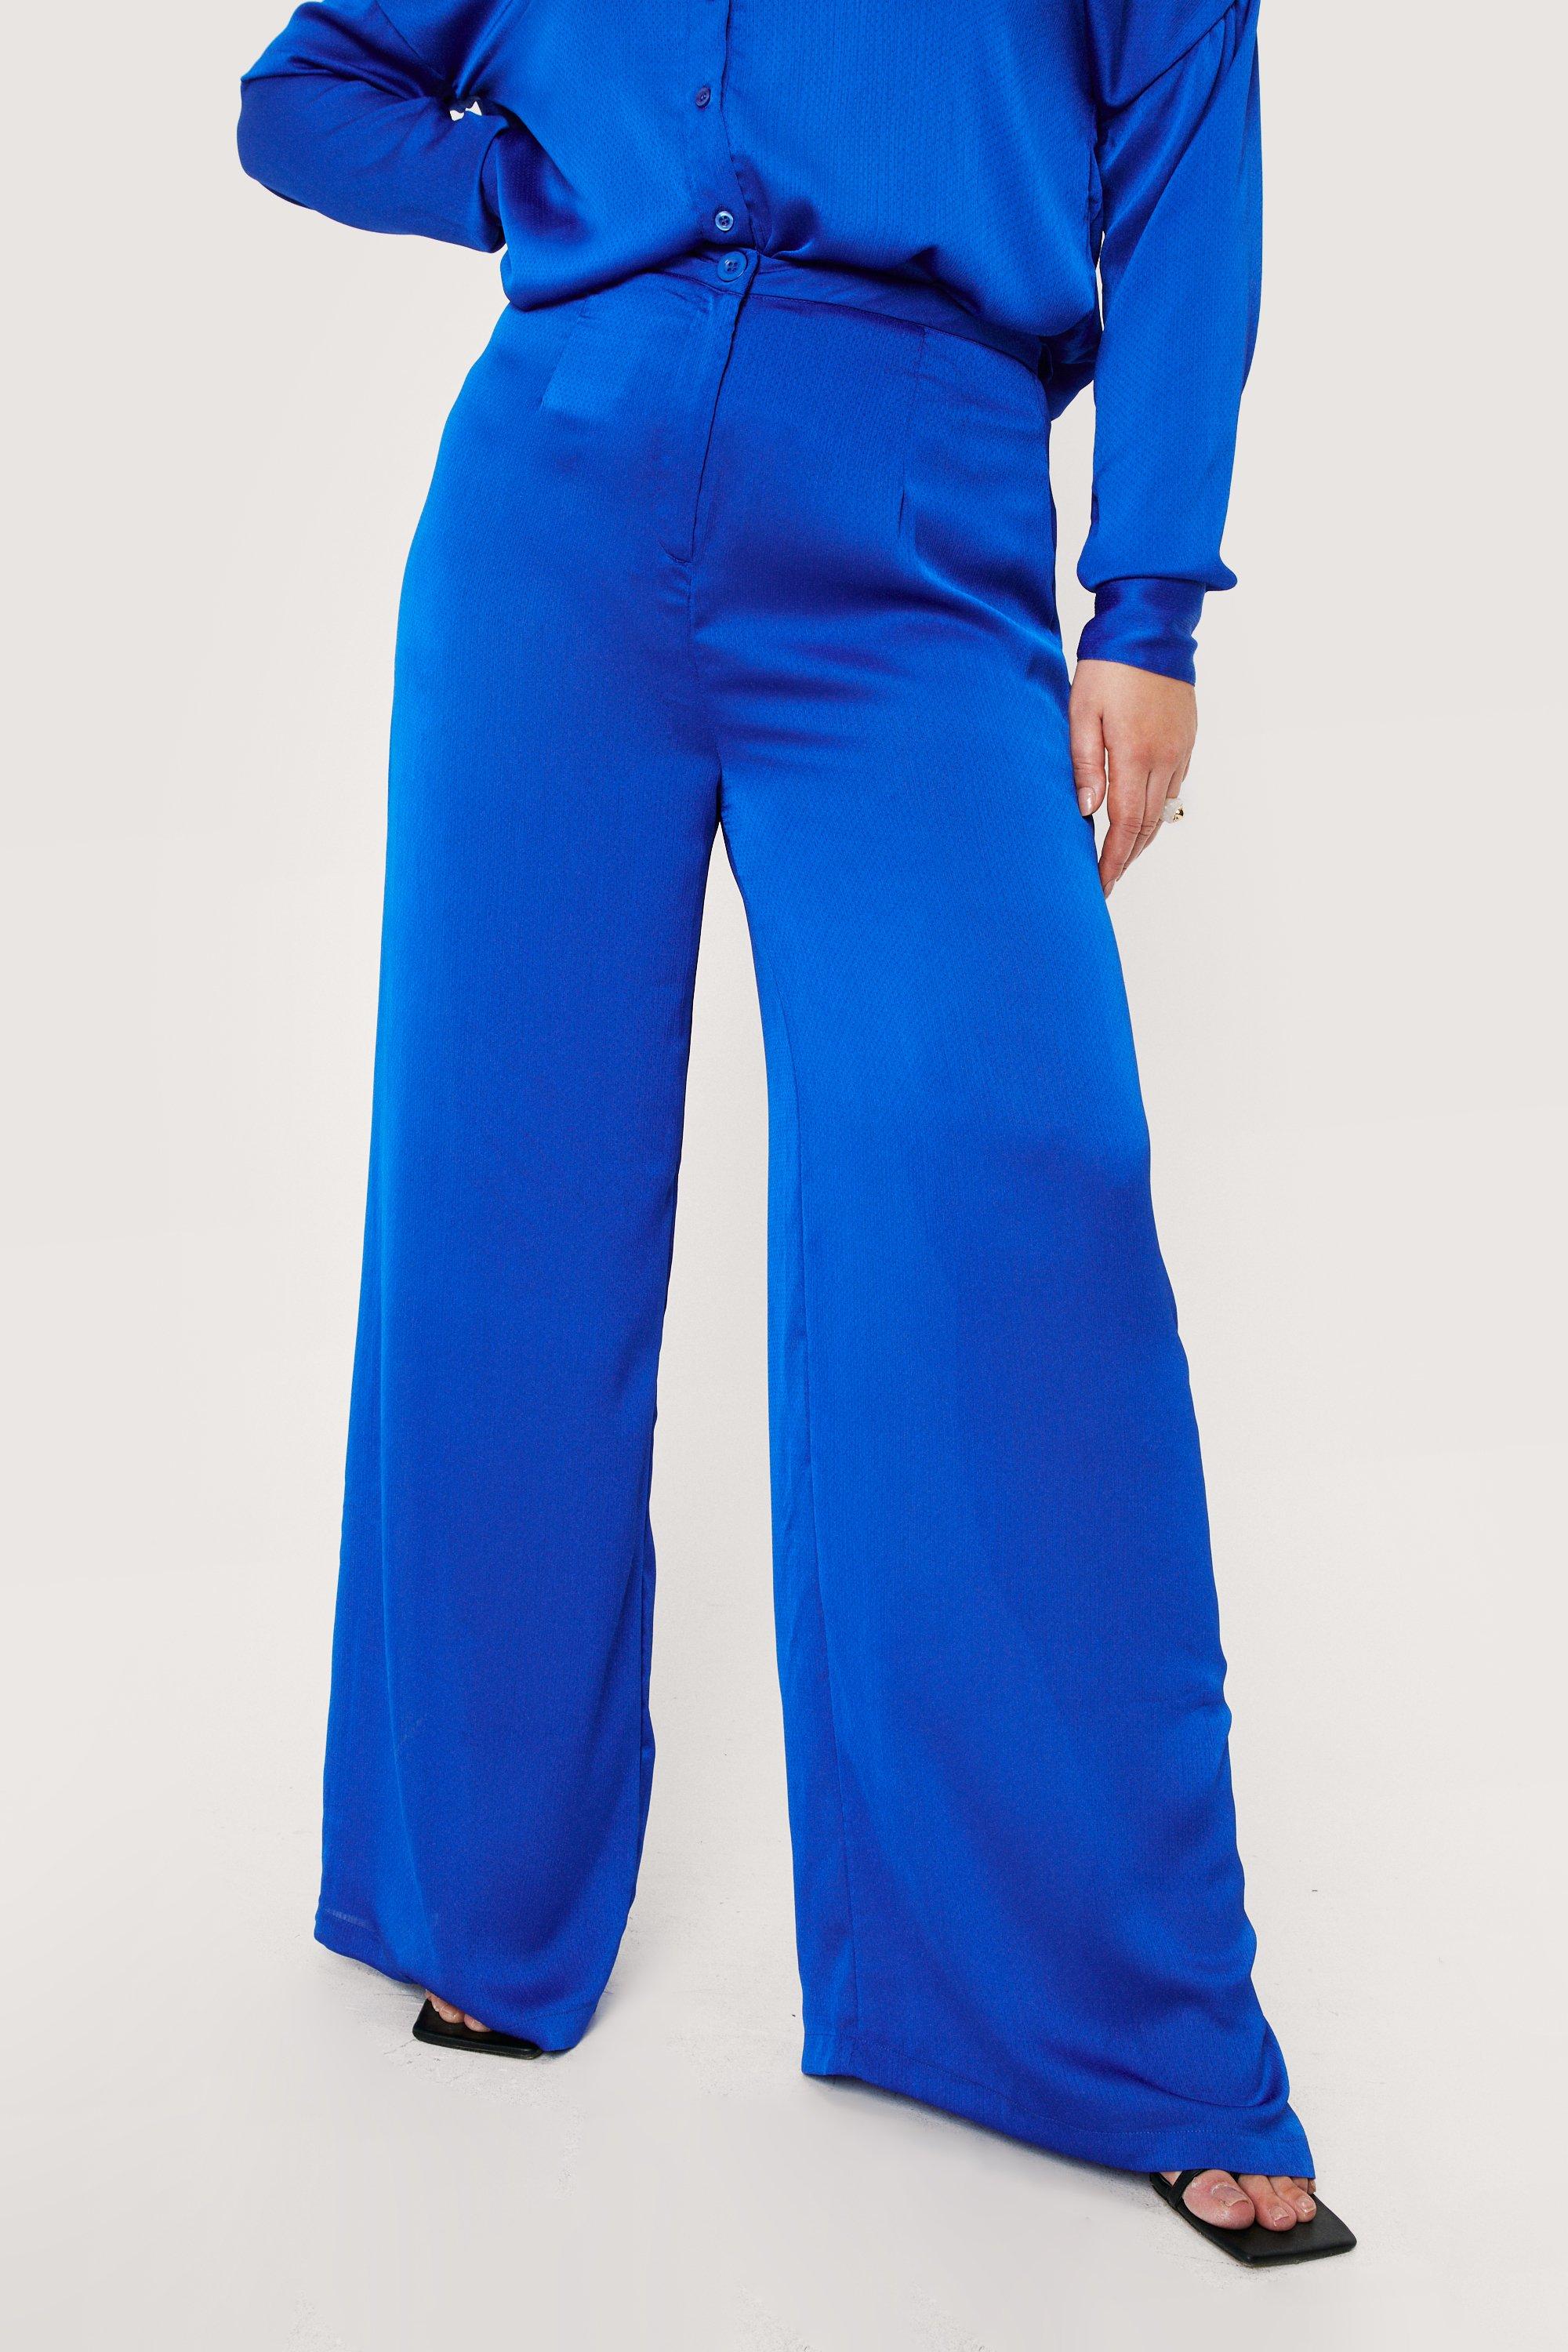 Plus Size Satin High Waisted Wide Leg Pants Nasty Gal | vlr.eng.br